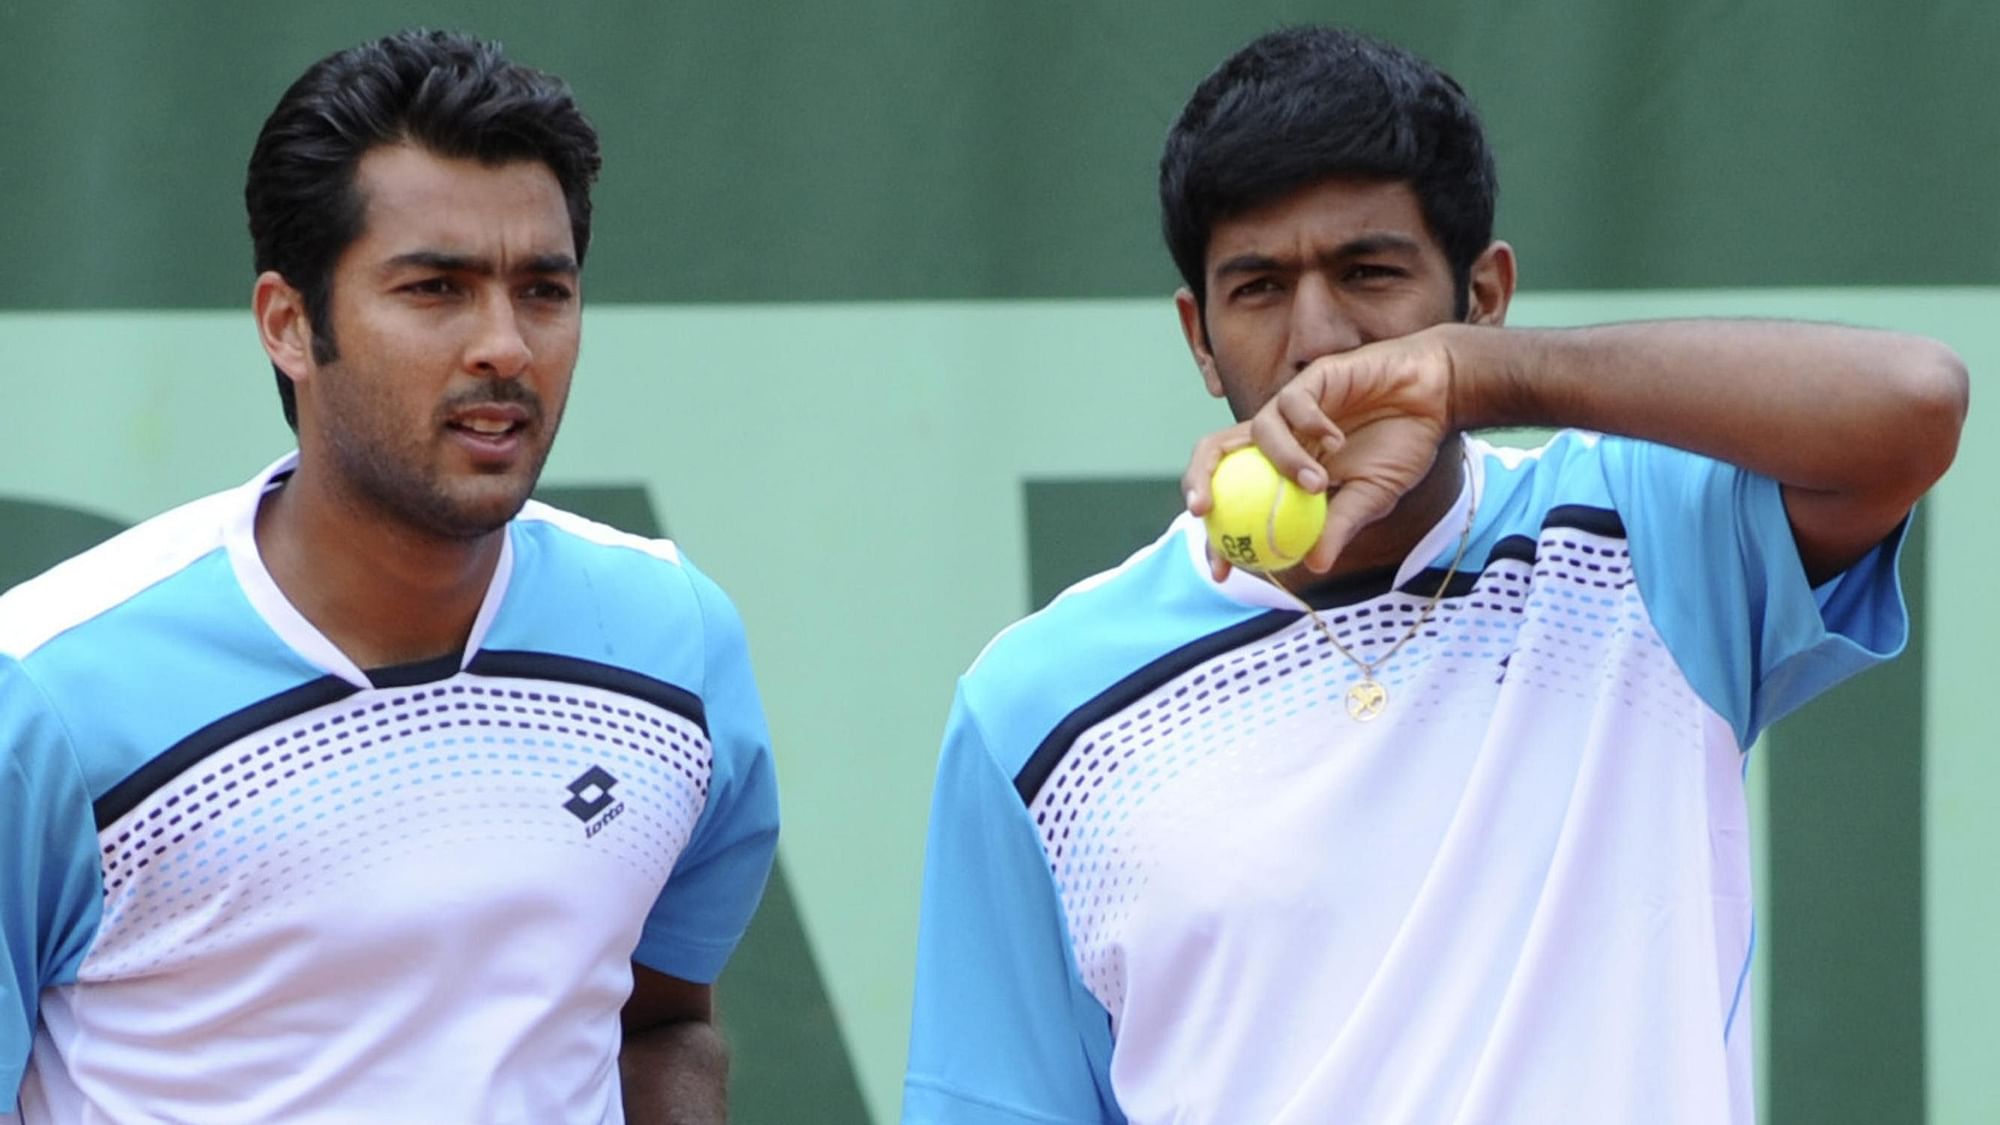 Aisam-ul-Haq Qureshi has slammed the ITF’s decision to move the Davis Cup tie between India and Pakistan out of Pak.